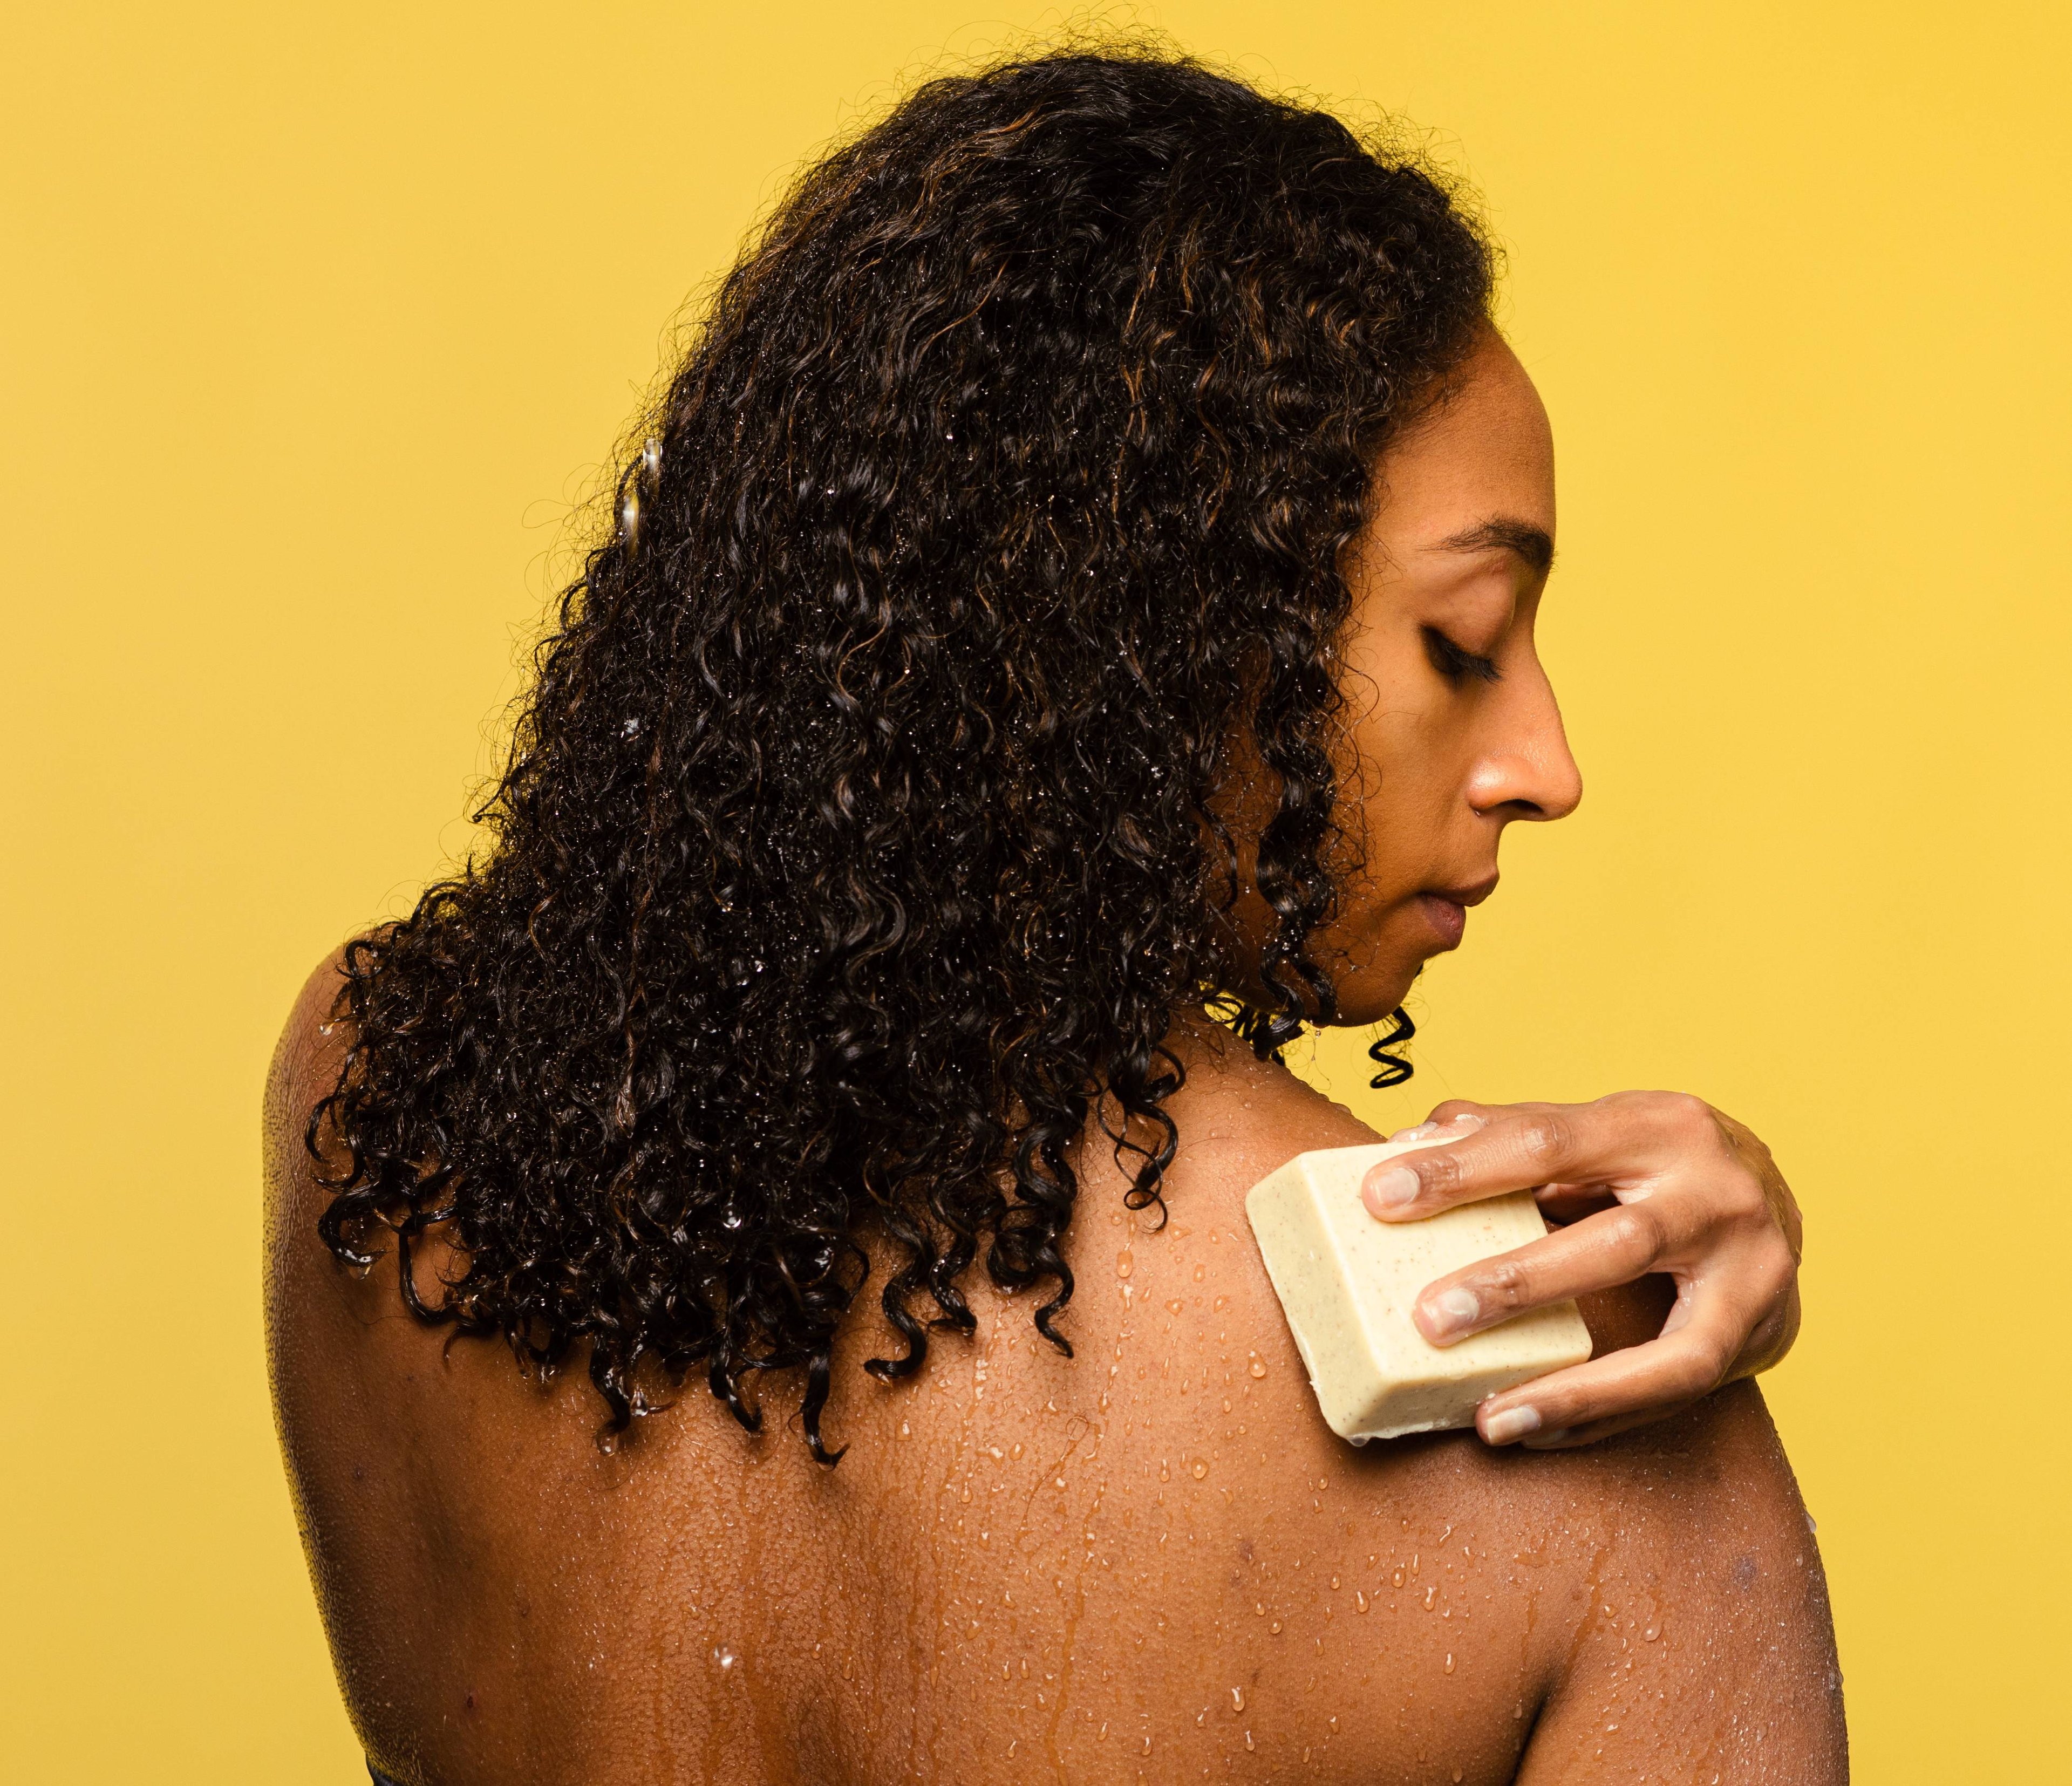 A person with long, curly hair holds Buffy, a cream coloured, square shaped solid body butter, on their water beaded shoulder.